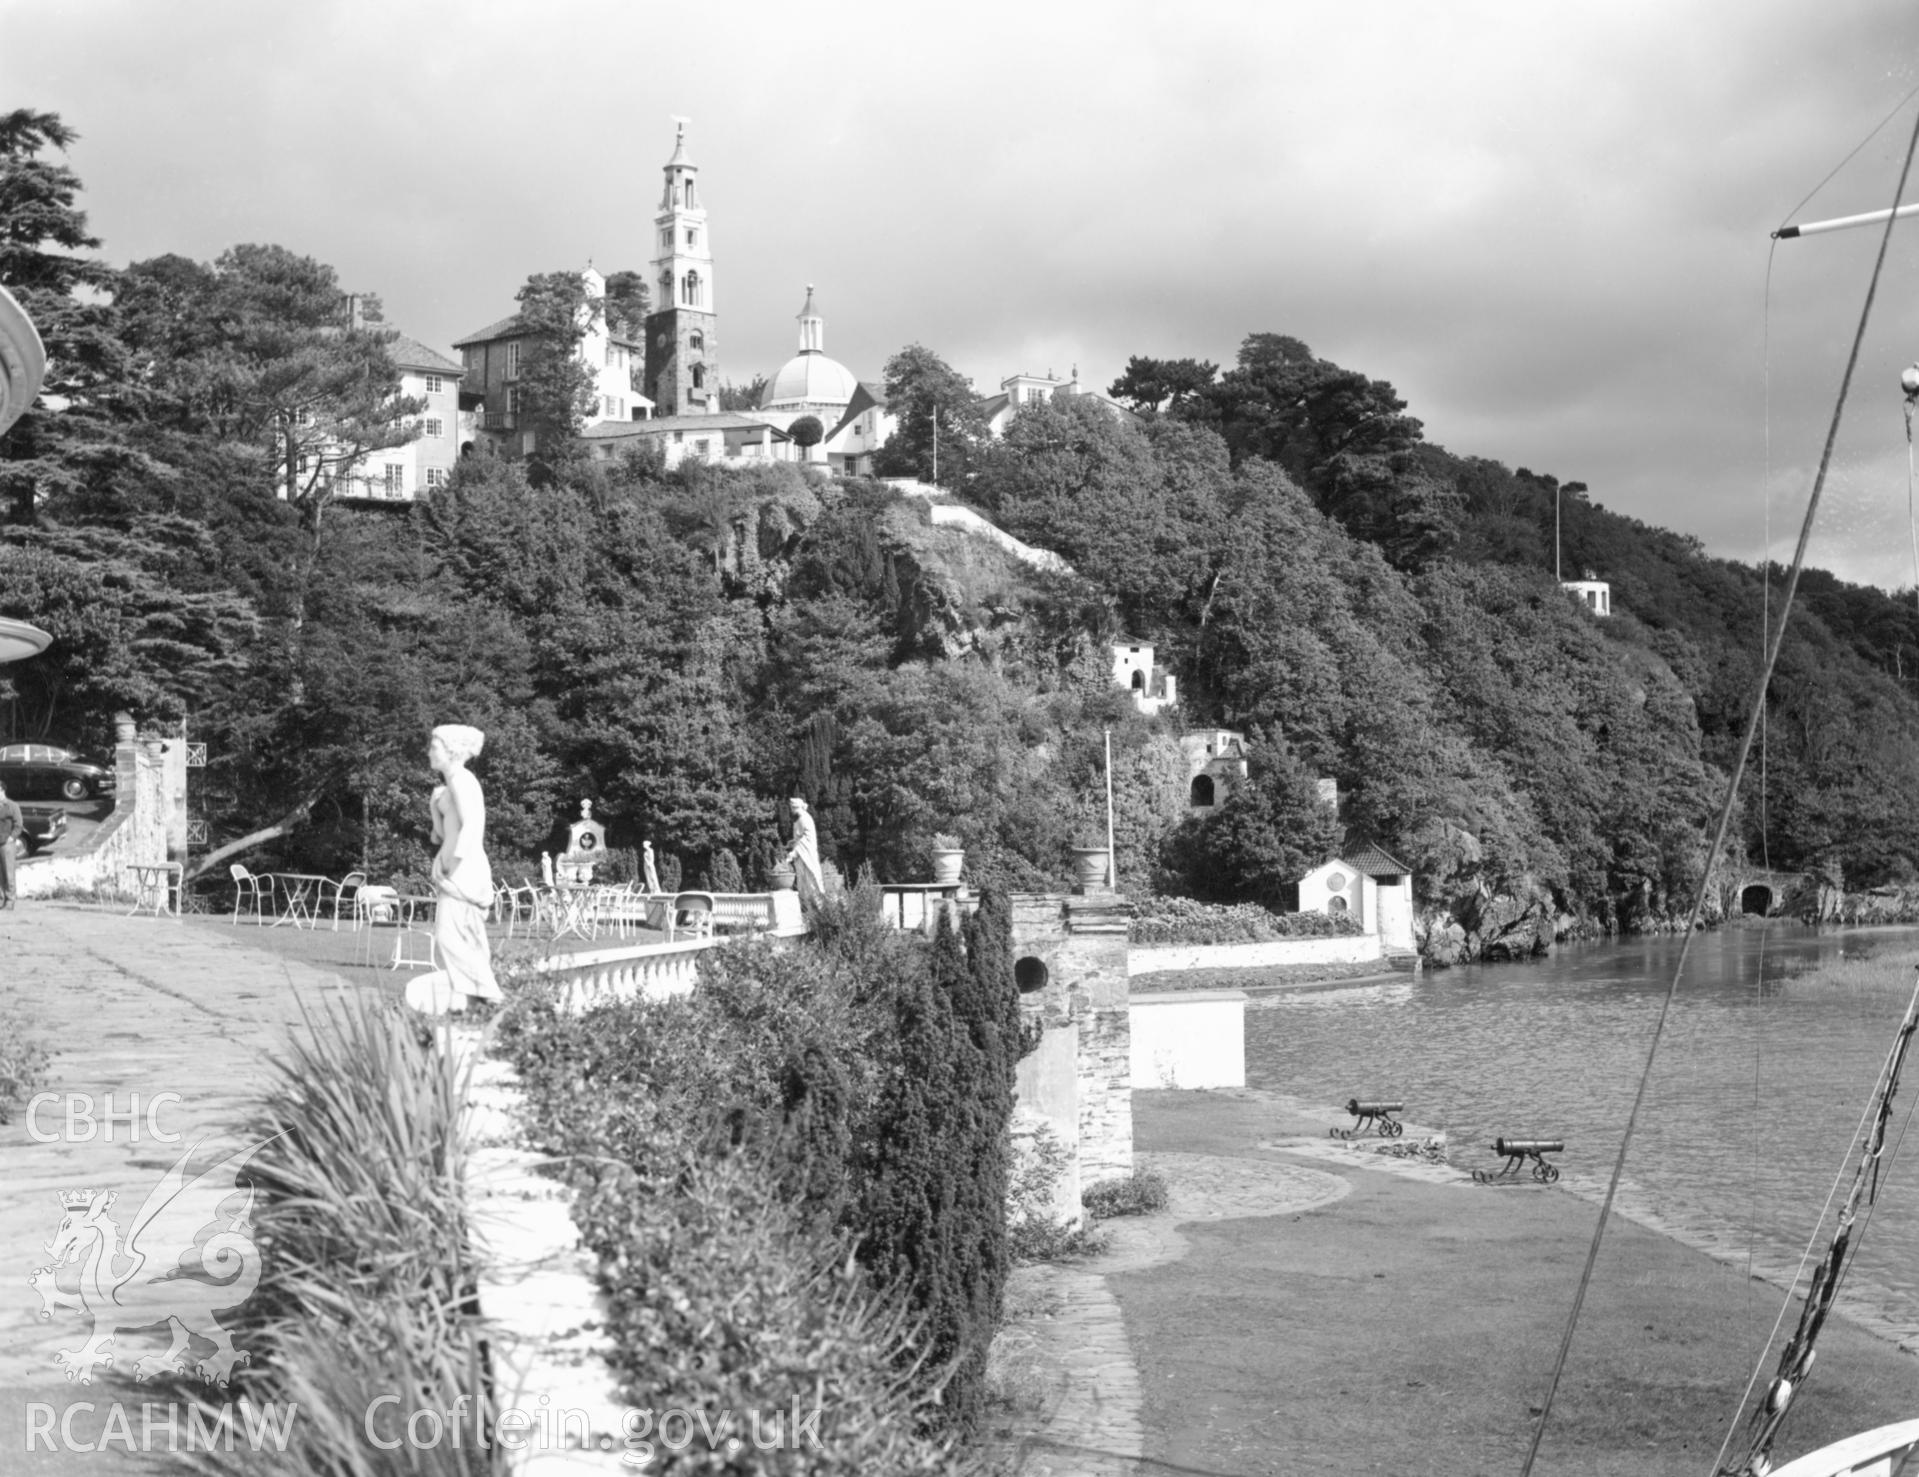 1 b/w print showing view of the terrace and statues in the village of Portmeirion; collated by the former Central Office of Information.